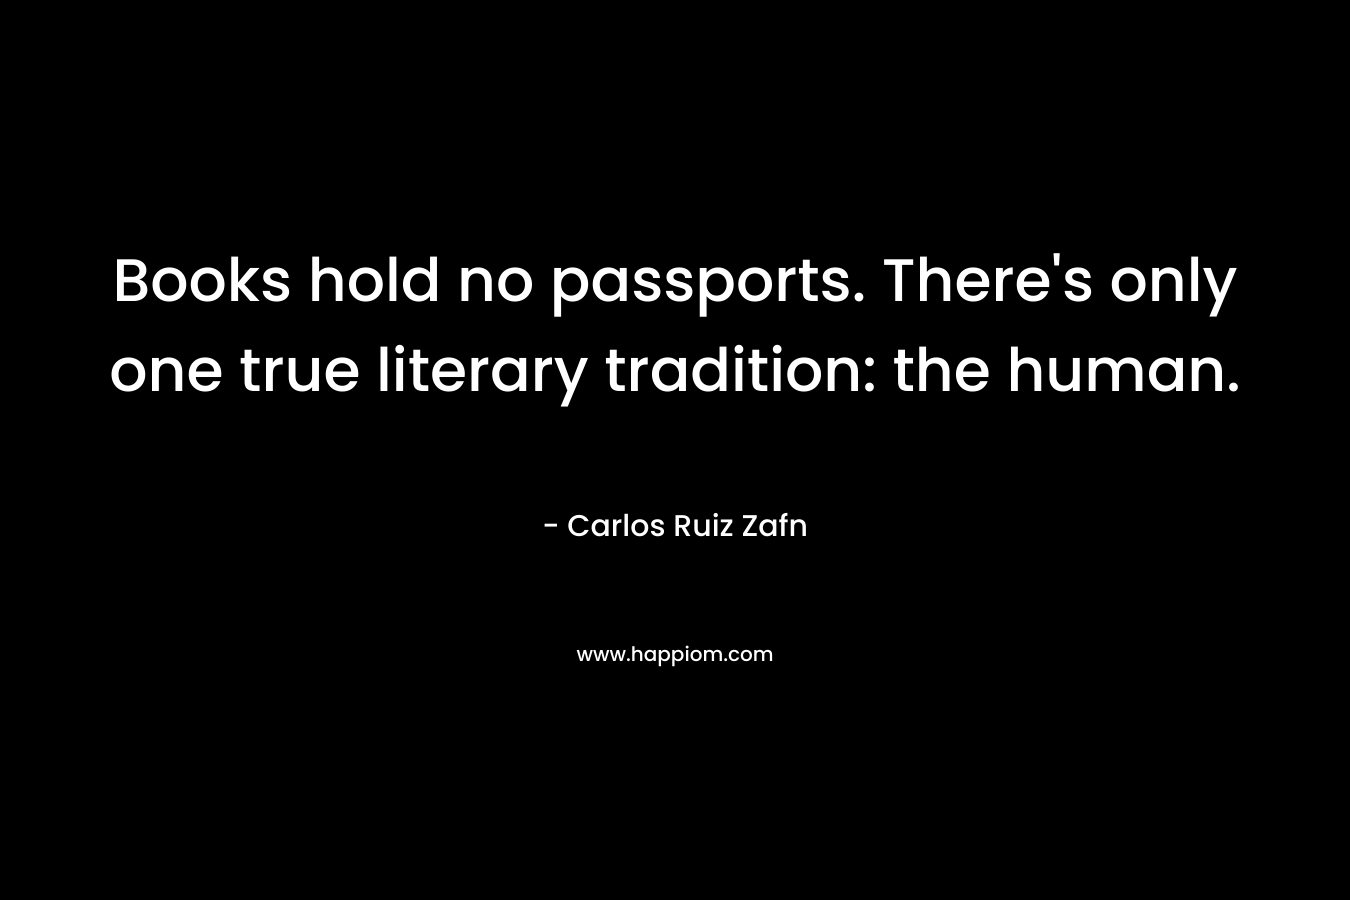 Books hold no passports. There's only one true literary tradition: the human.